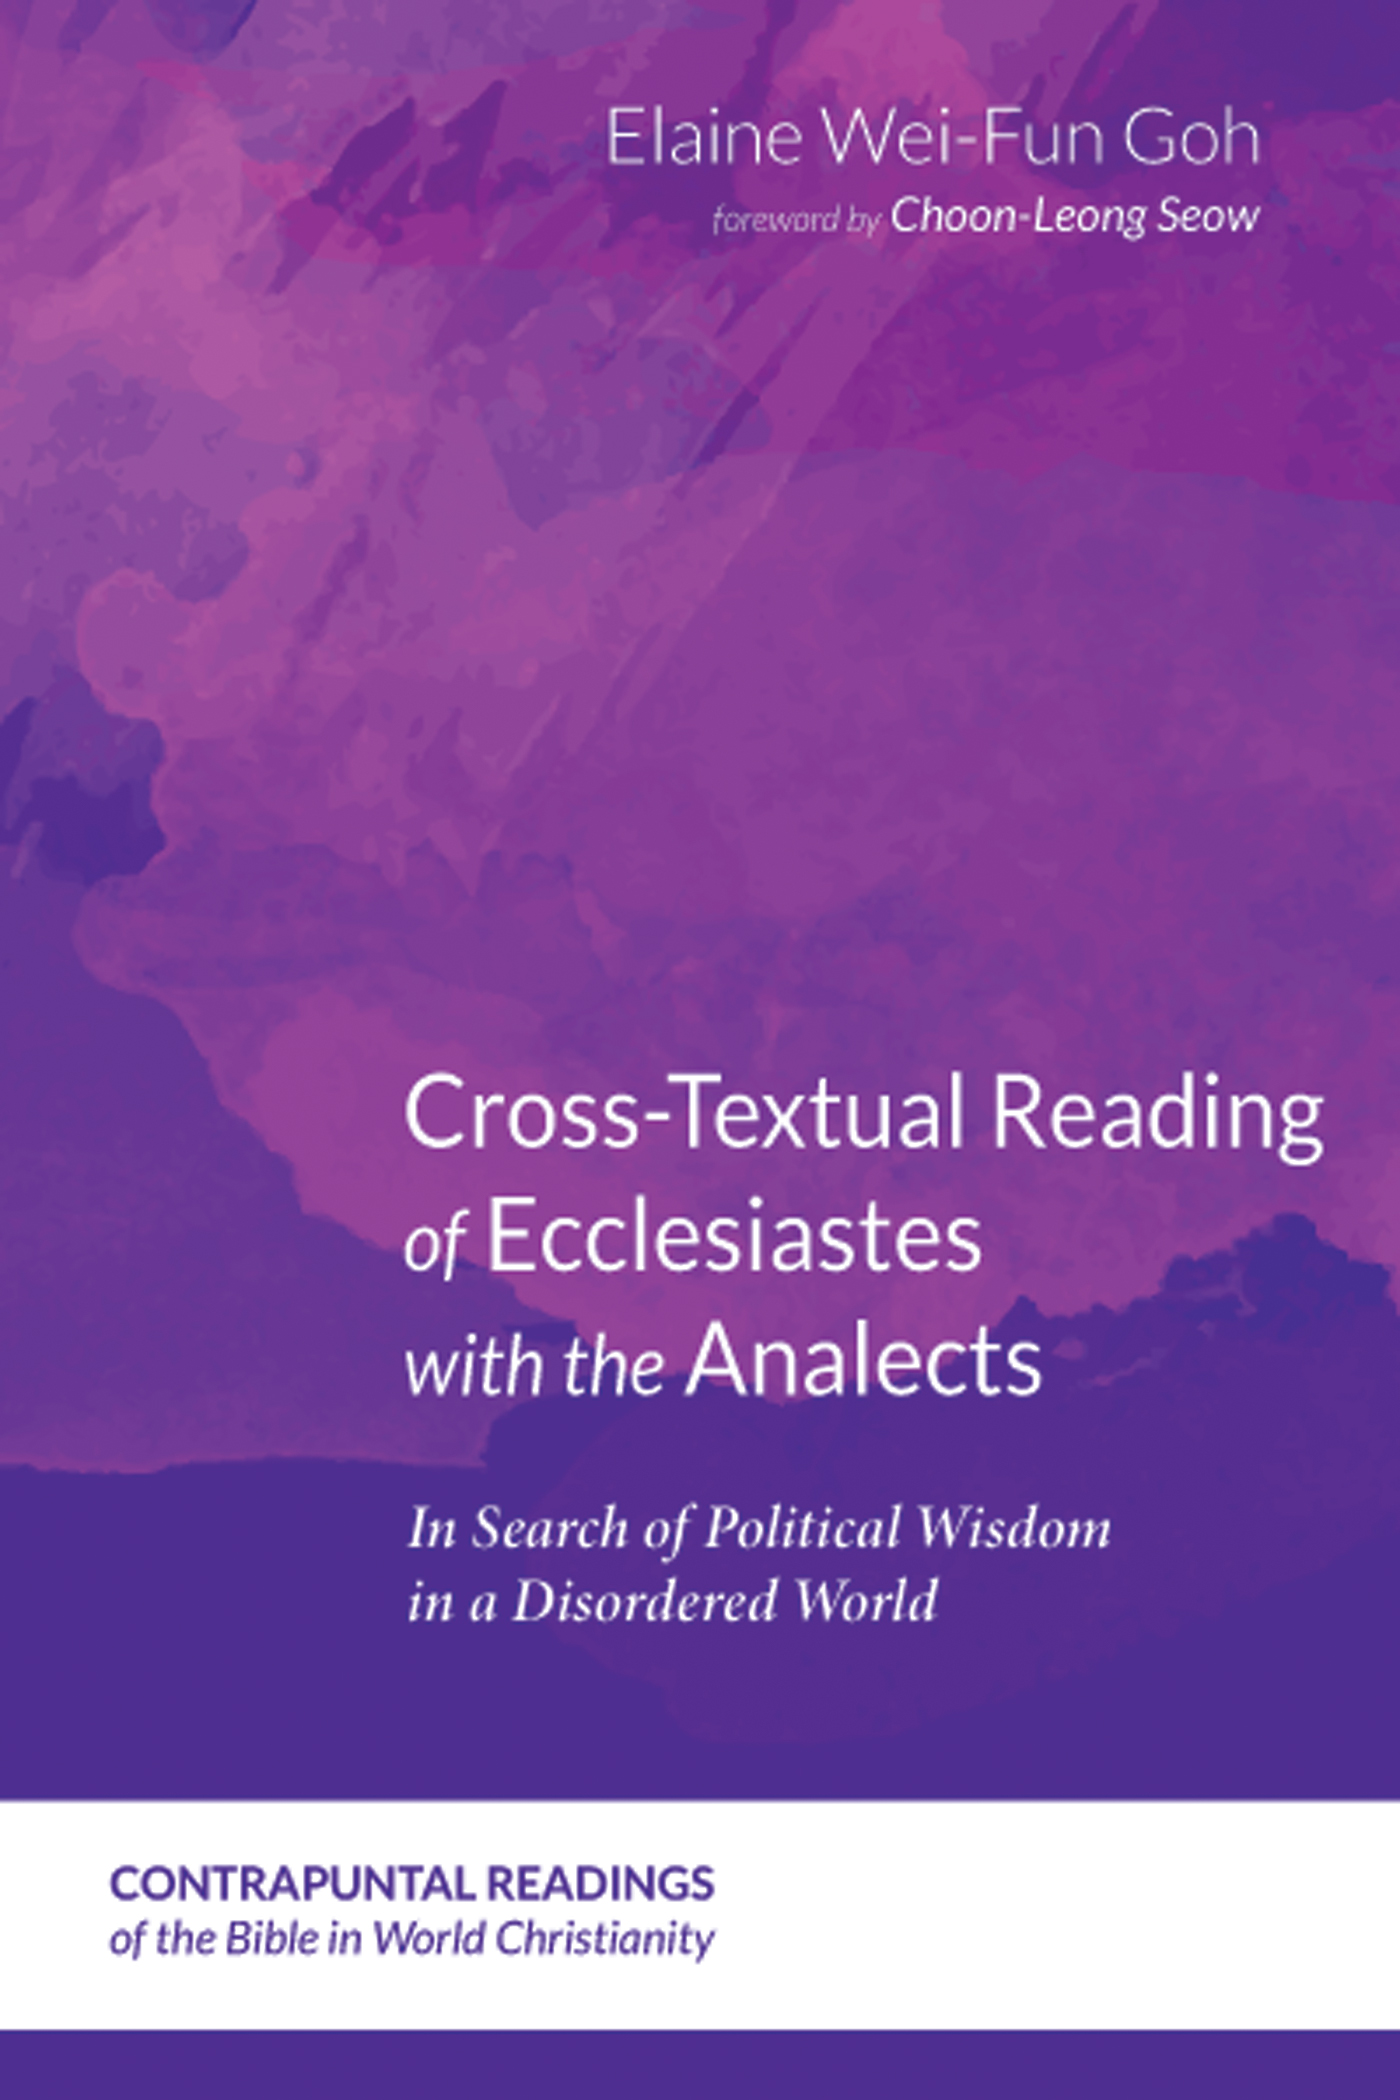 Contrapuntal Readings of the Bible in World Christianity Series - photo 1